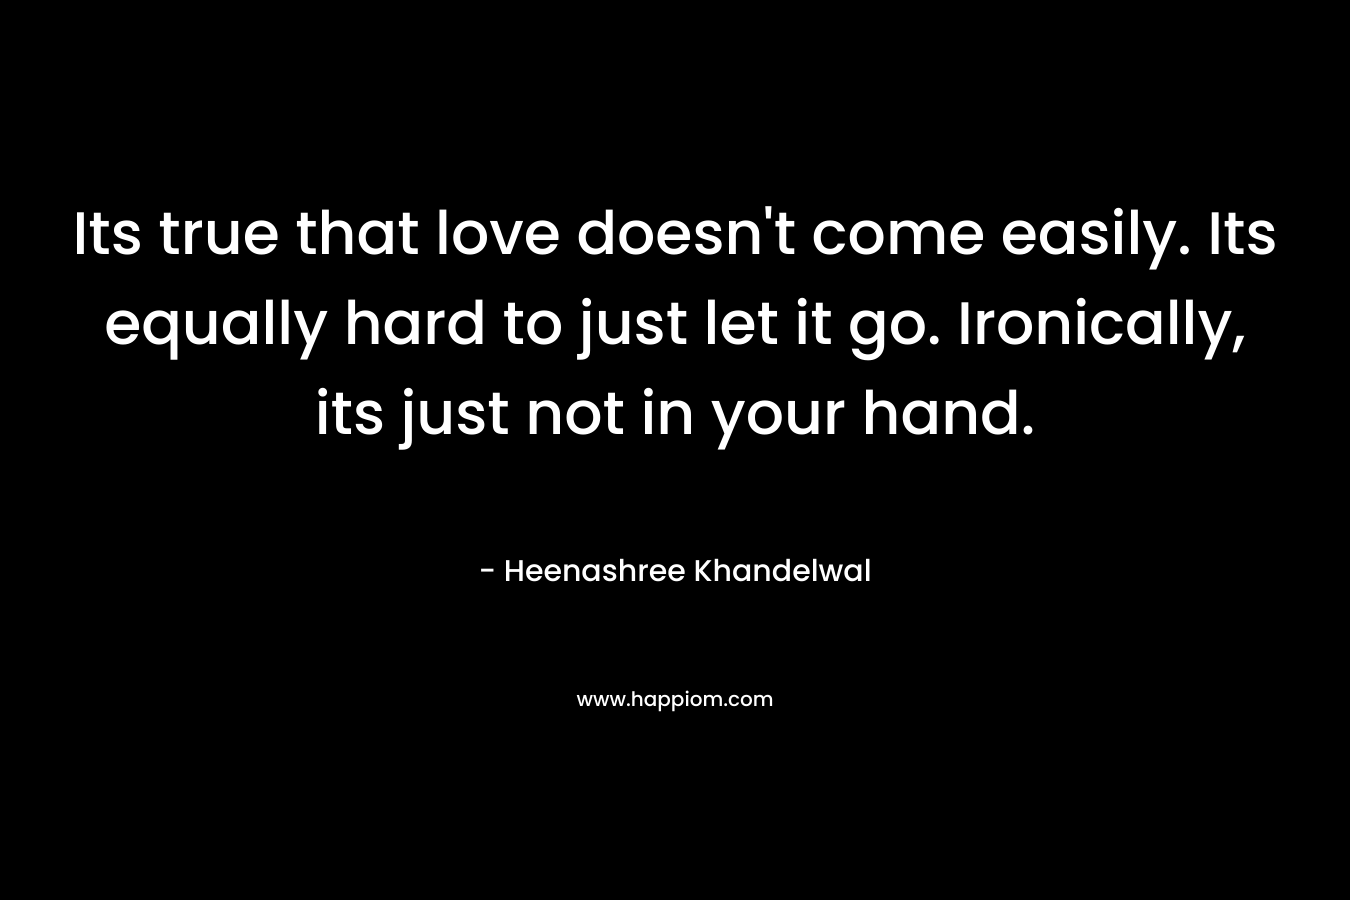 Its true that love doesn't come easily. Its equally hard to just let it go. Ironically, its just not in your hand.